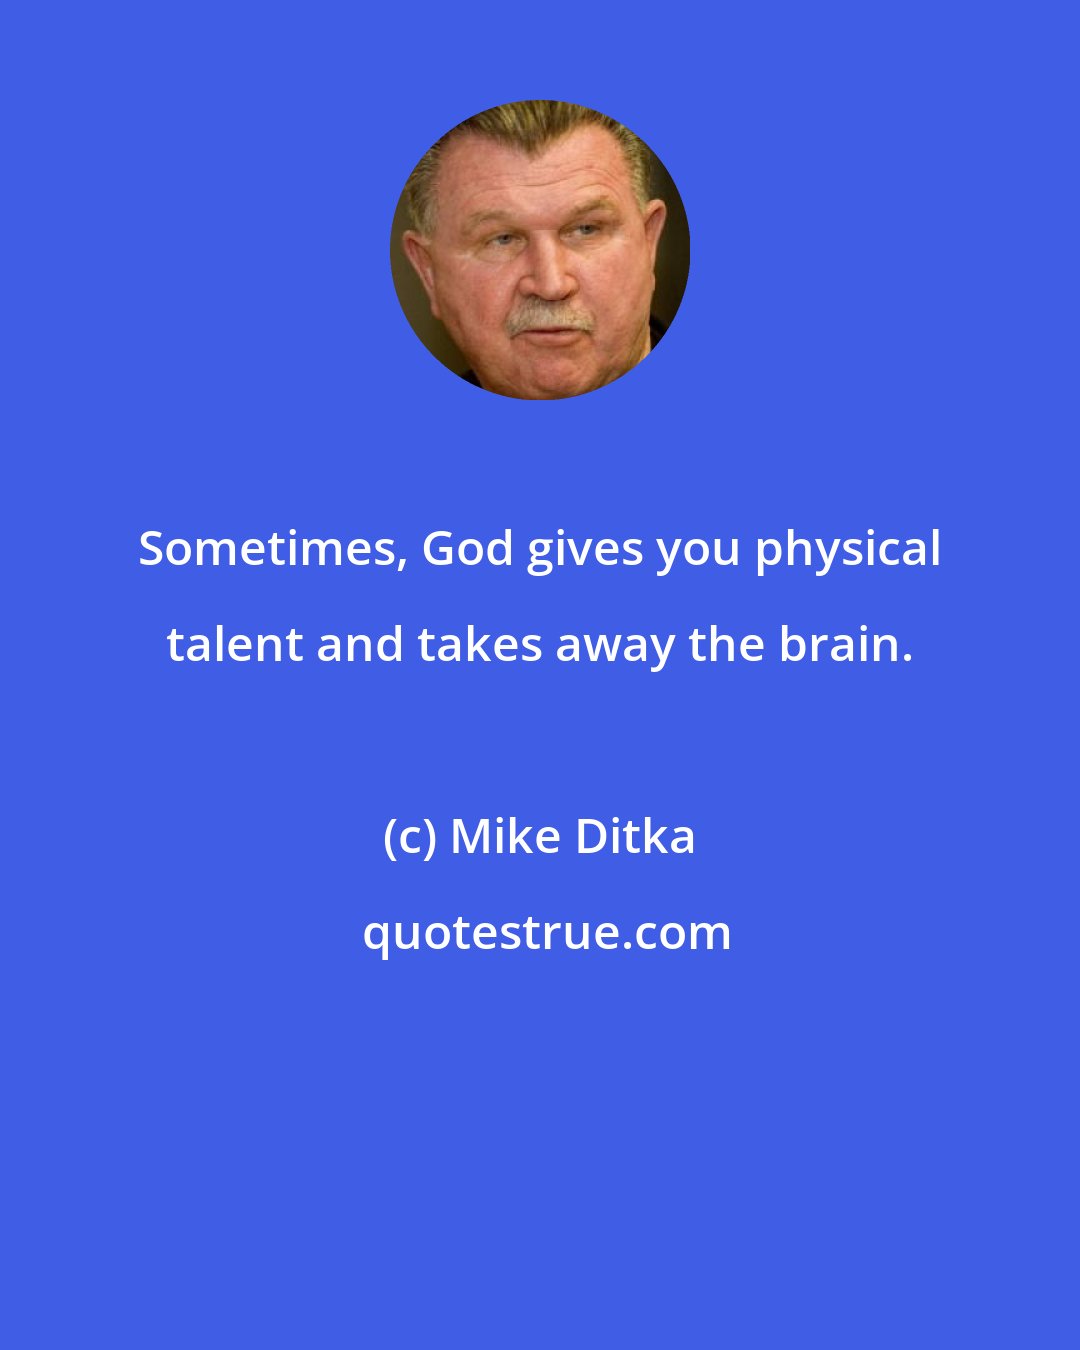 Mike Ditka: Sometimes, God gives you physical talent and takes away the brain.